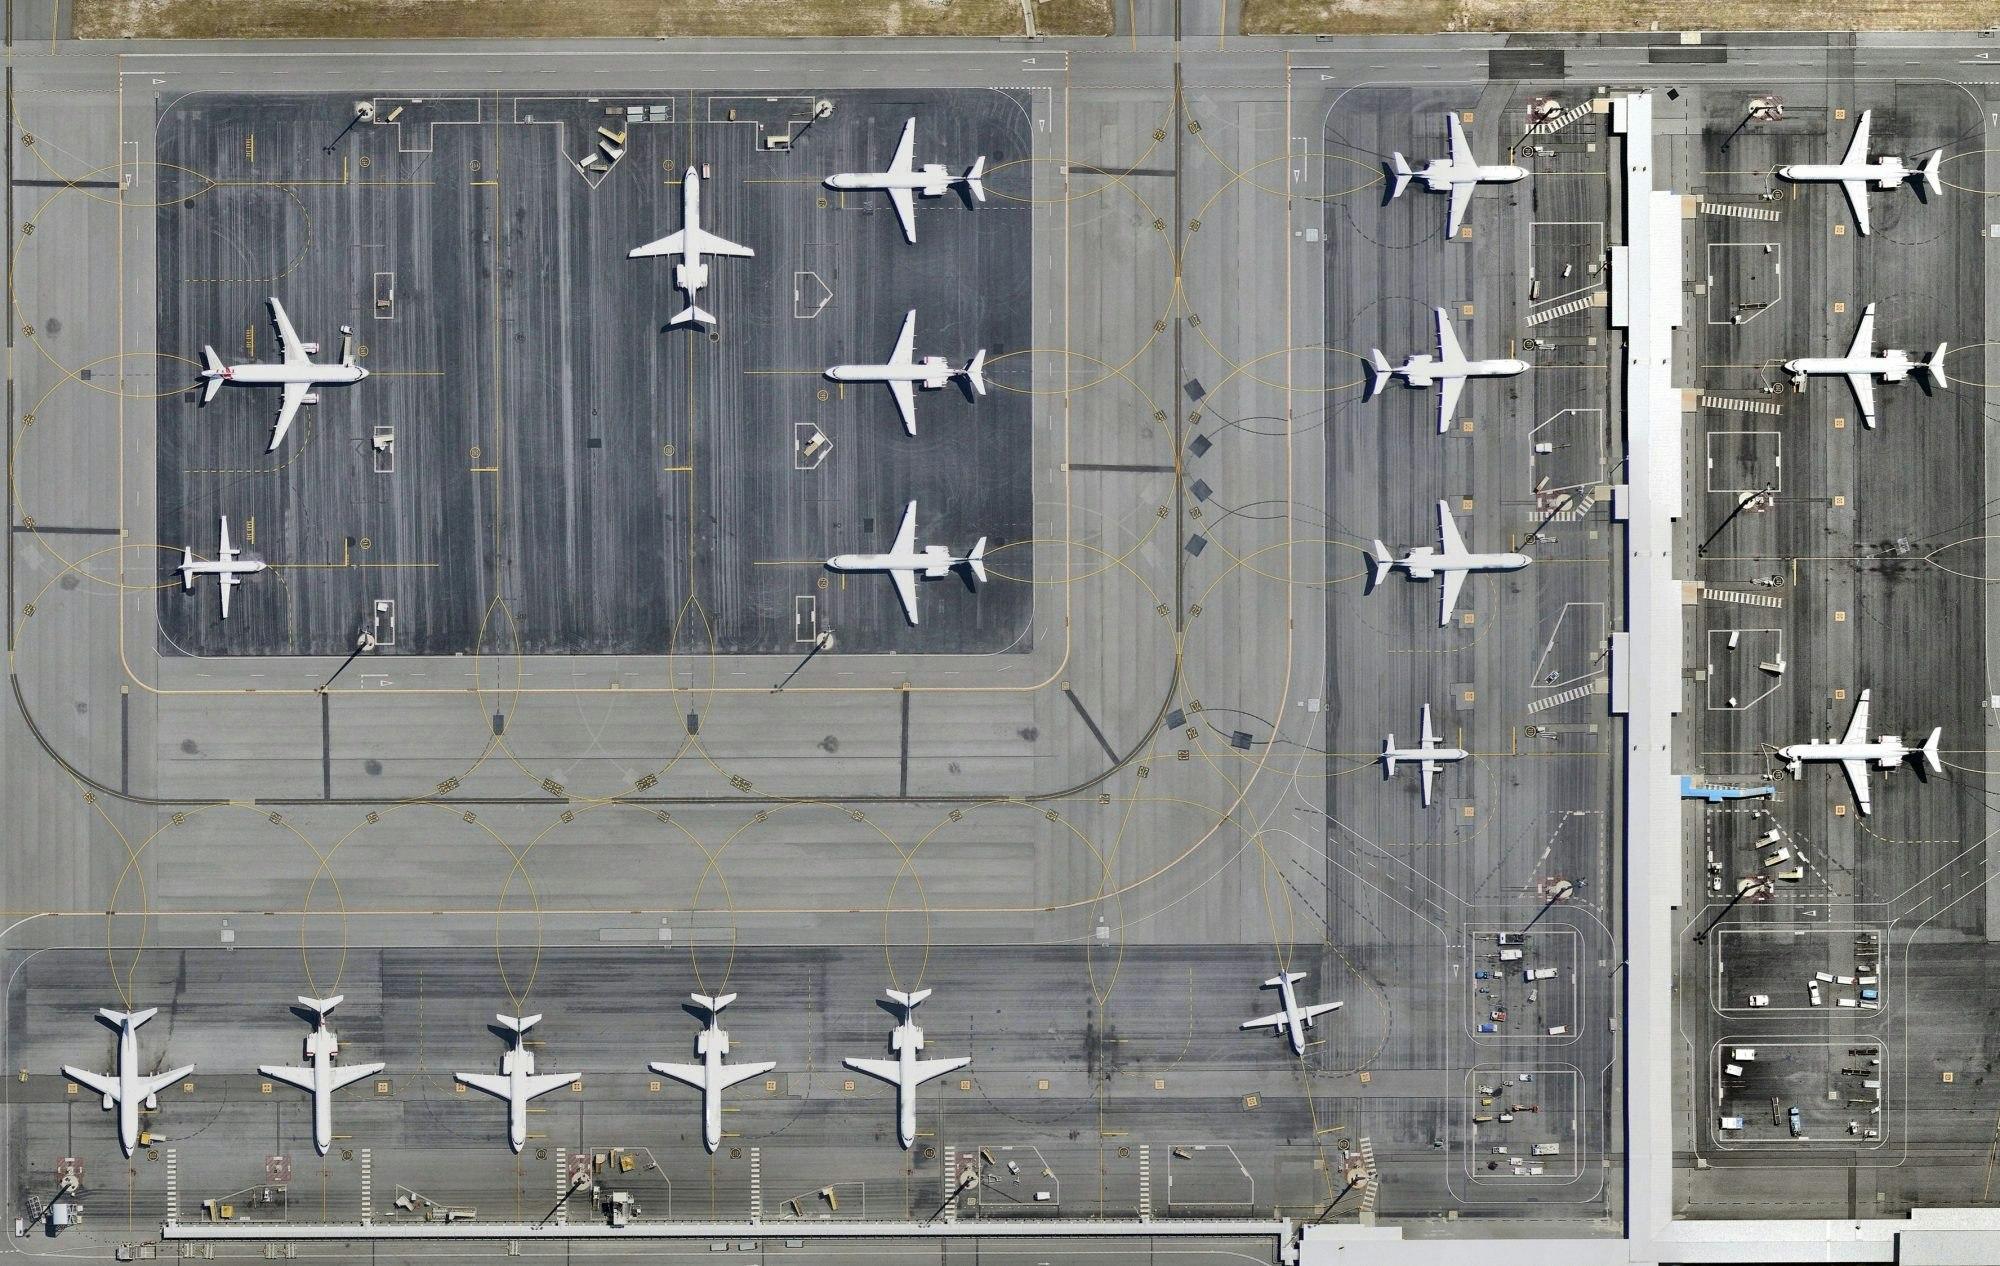 Travel News - Airplanes parked at airport